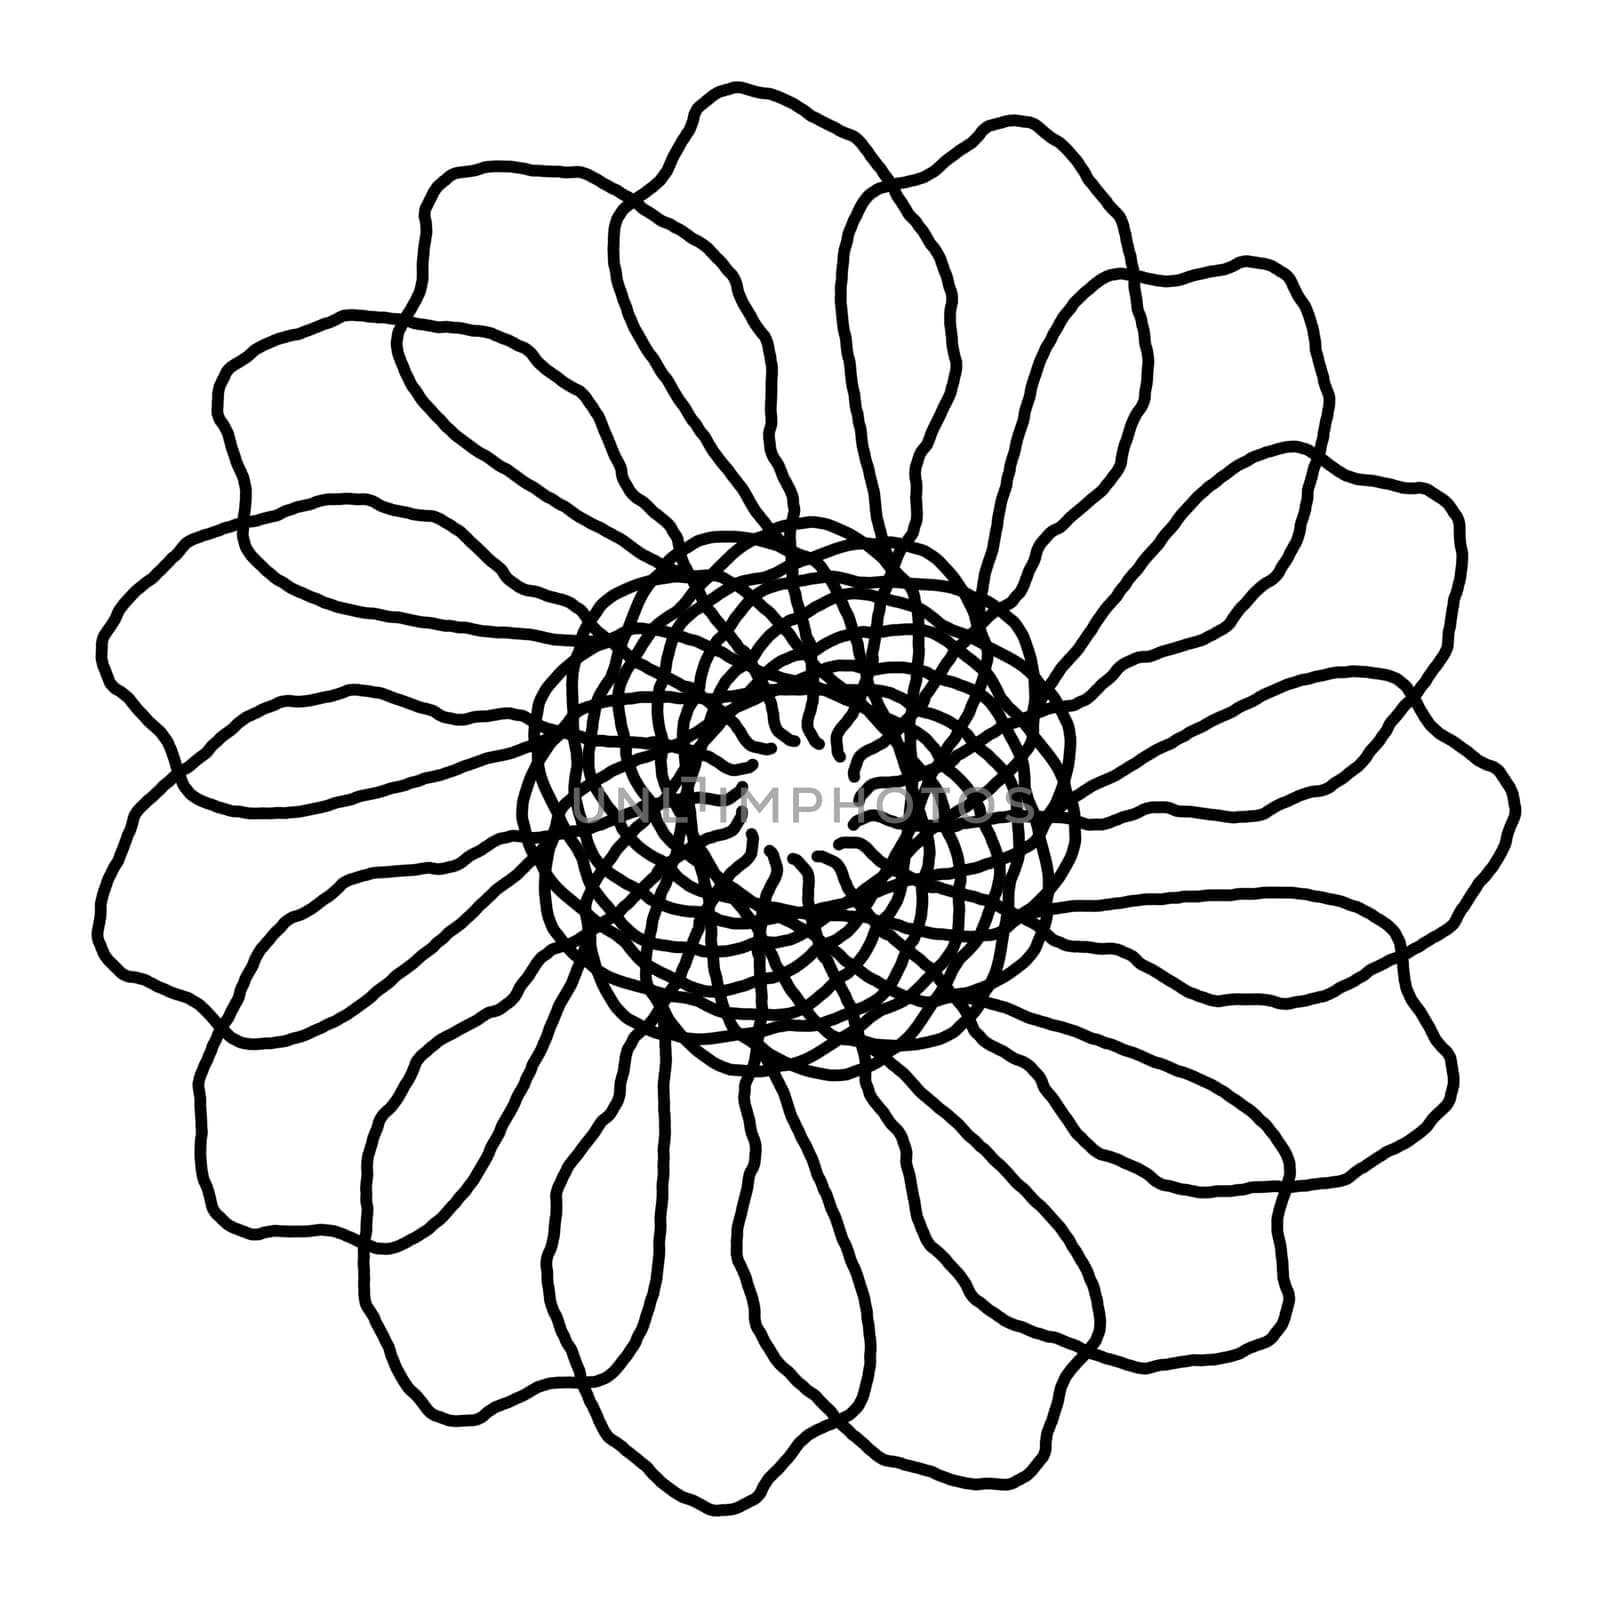 Black and White Hand Drawn Mandala for Coloring Pages, Coloring Books and Coloring Sheets. by Rina_Dozornaya